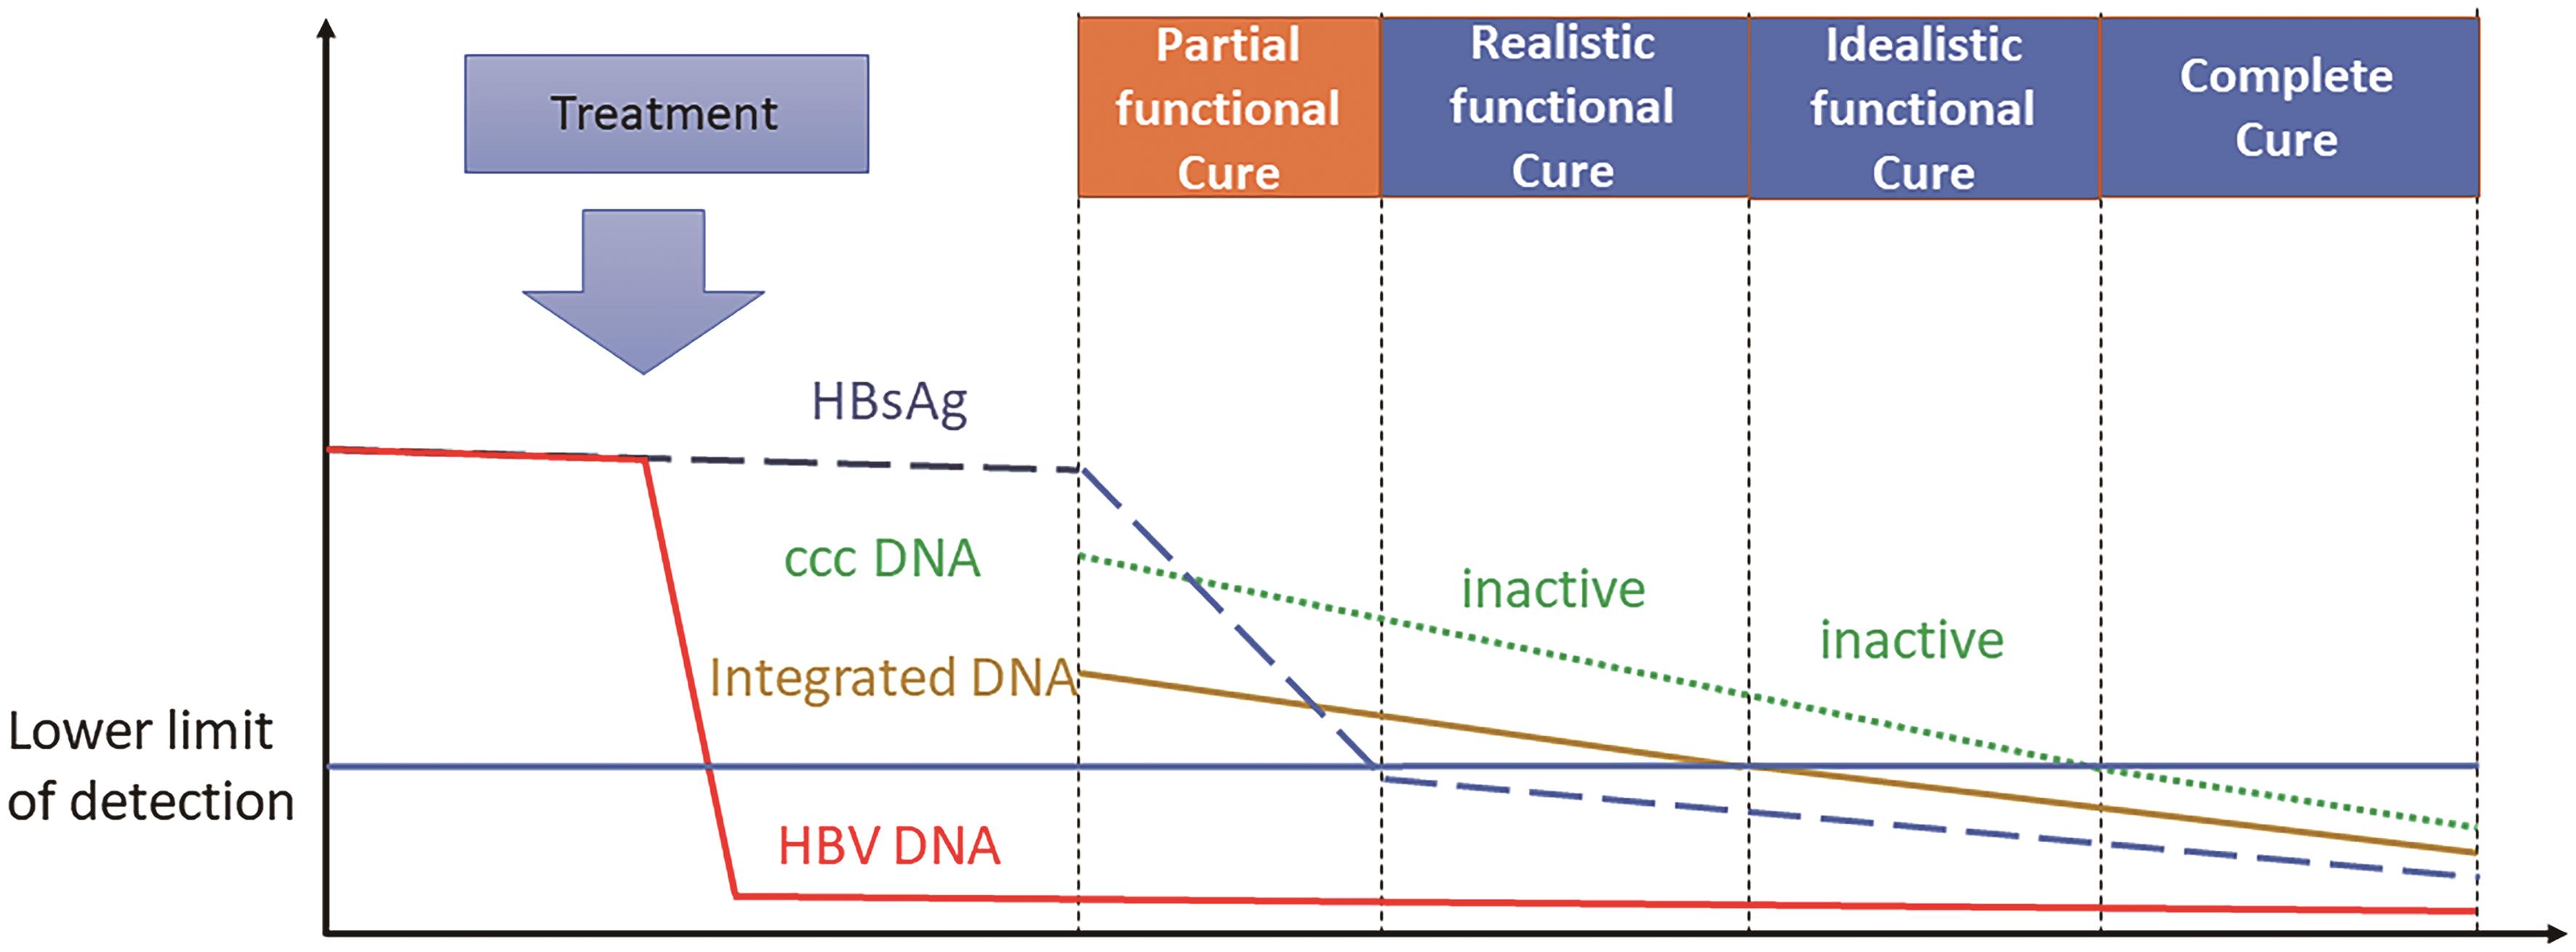 Characteristics and evolution of the biomarkers defining various hepatitis B cures.